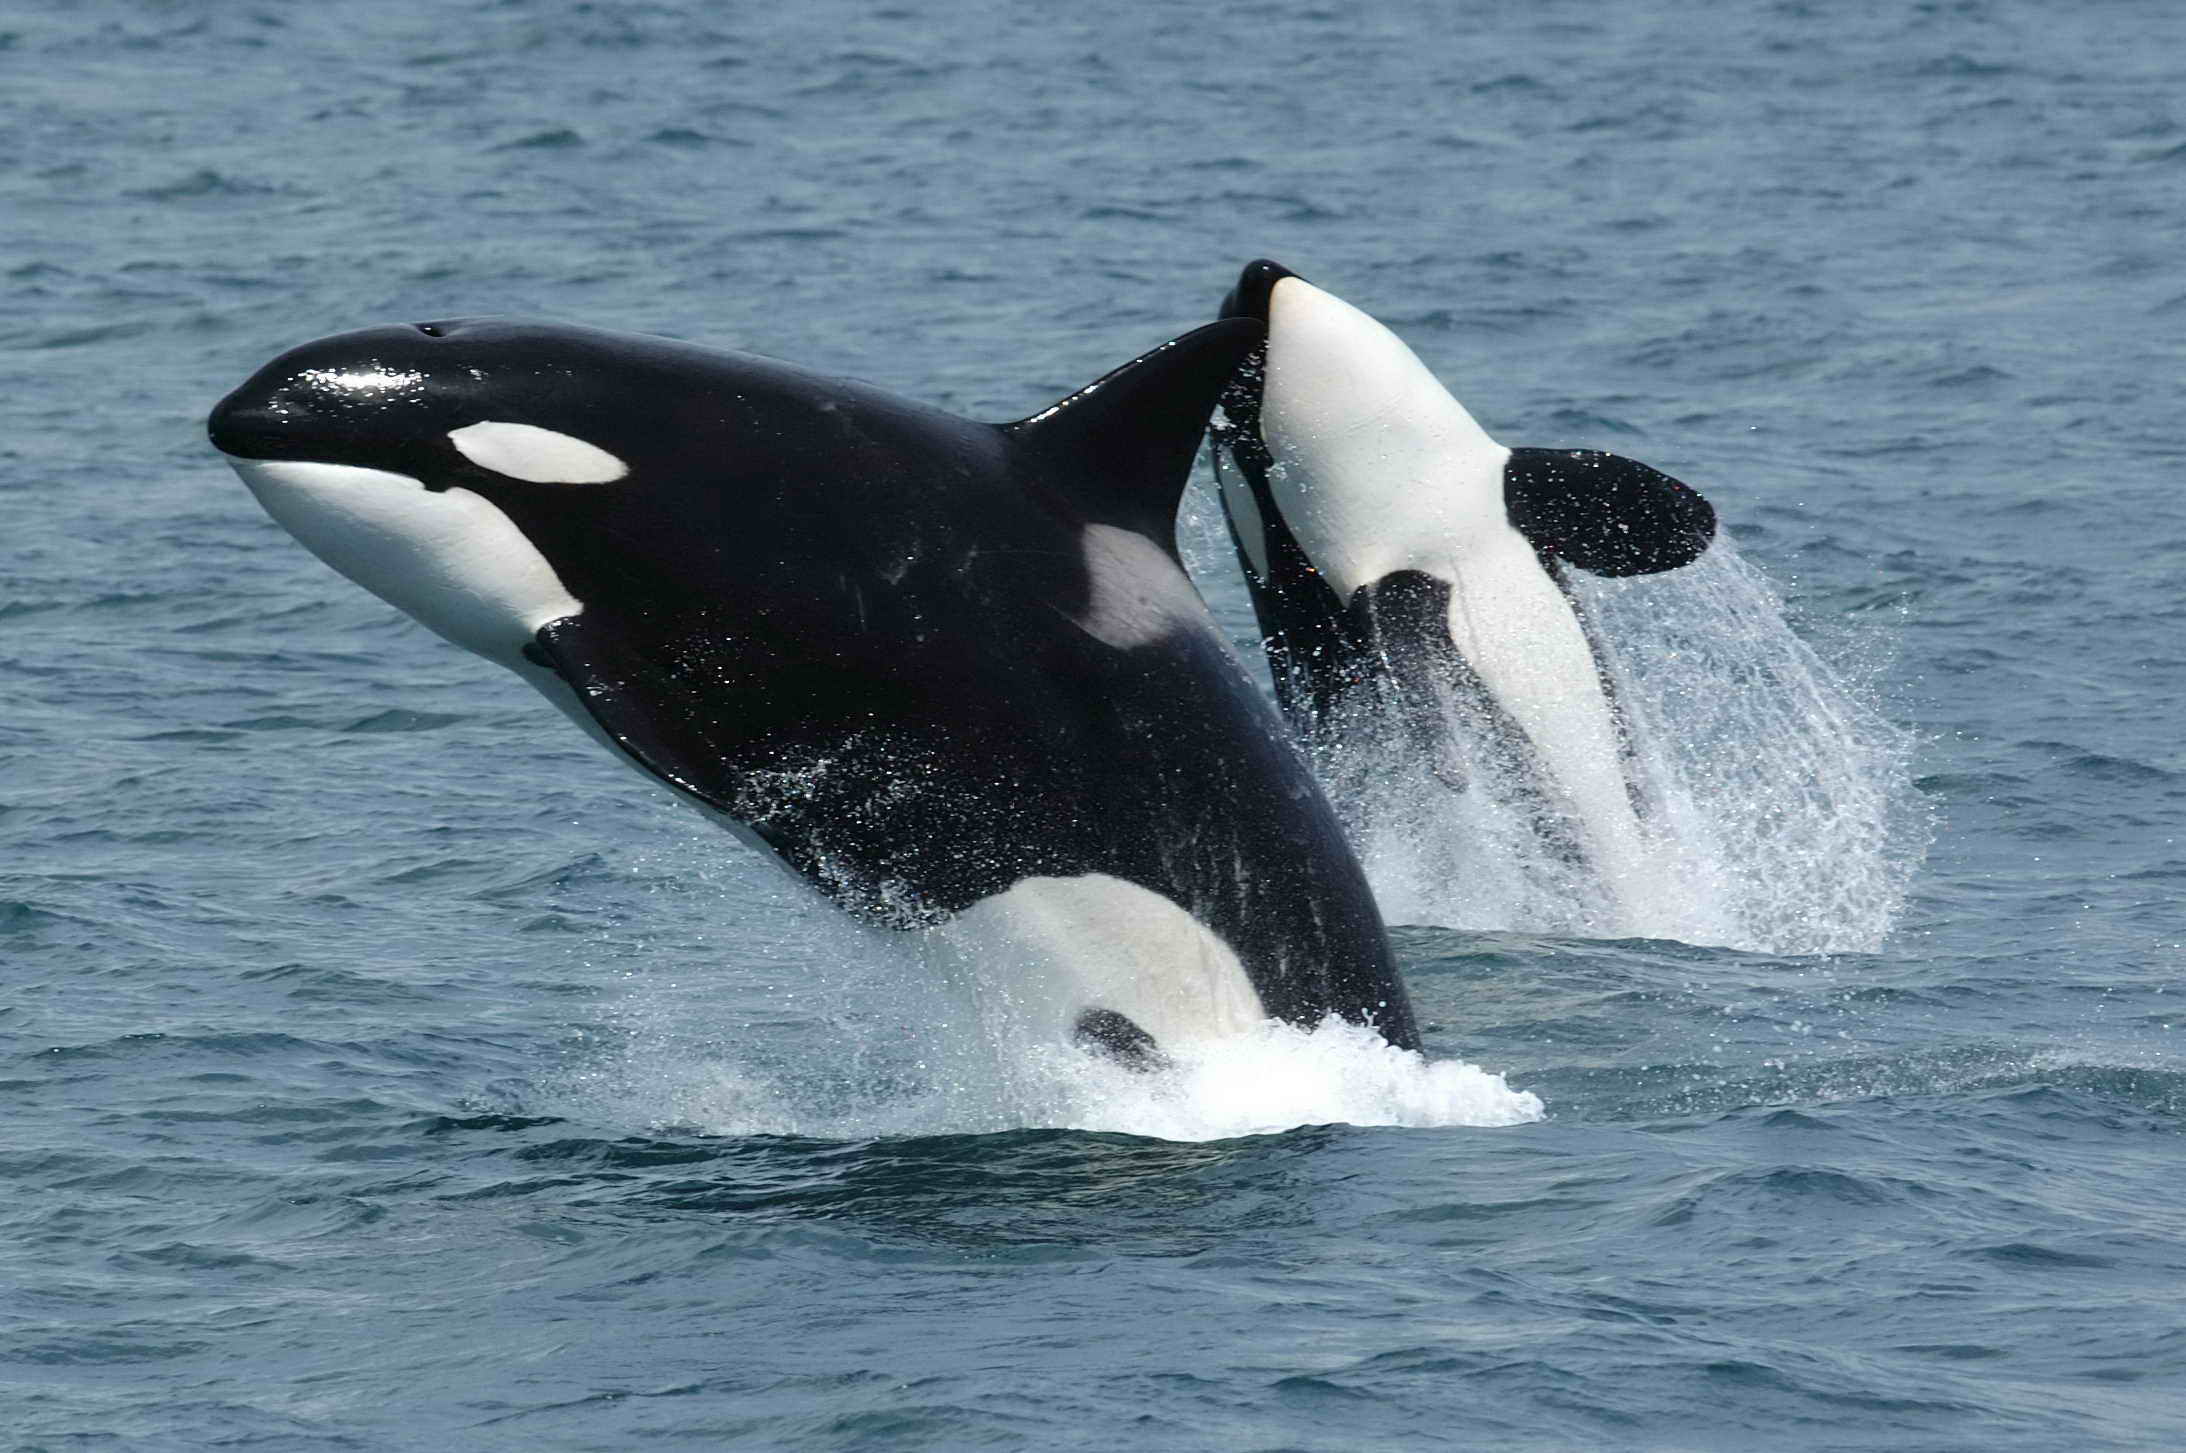 Killer whales are closer to being free from captivity and forced entertainment